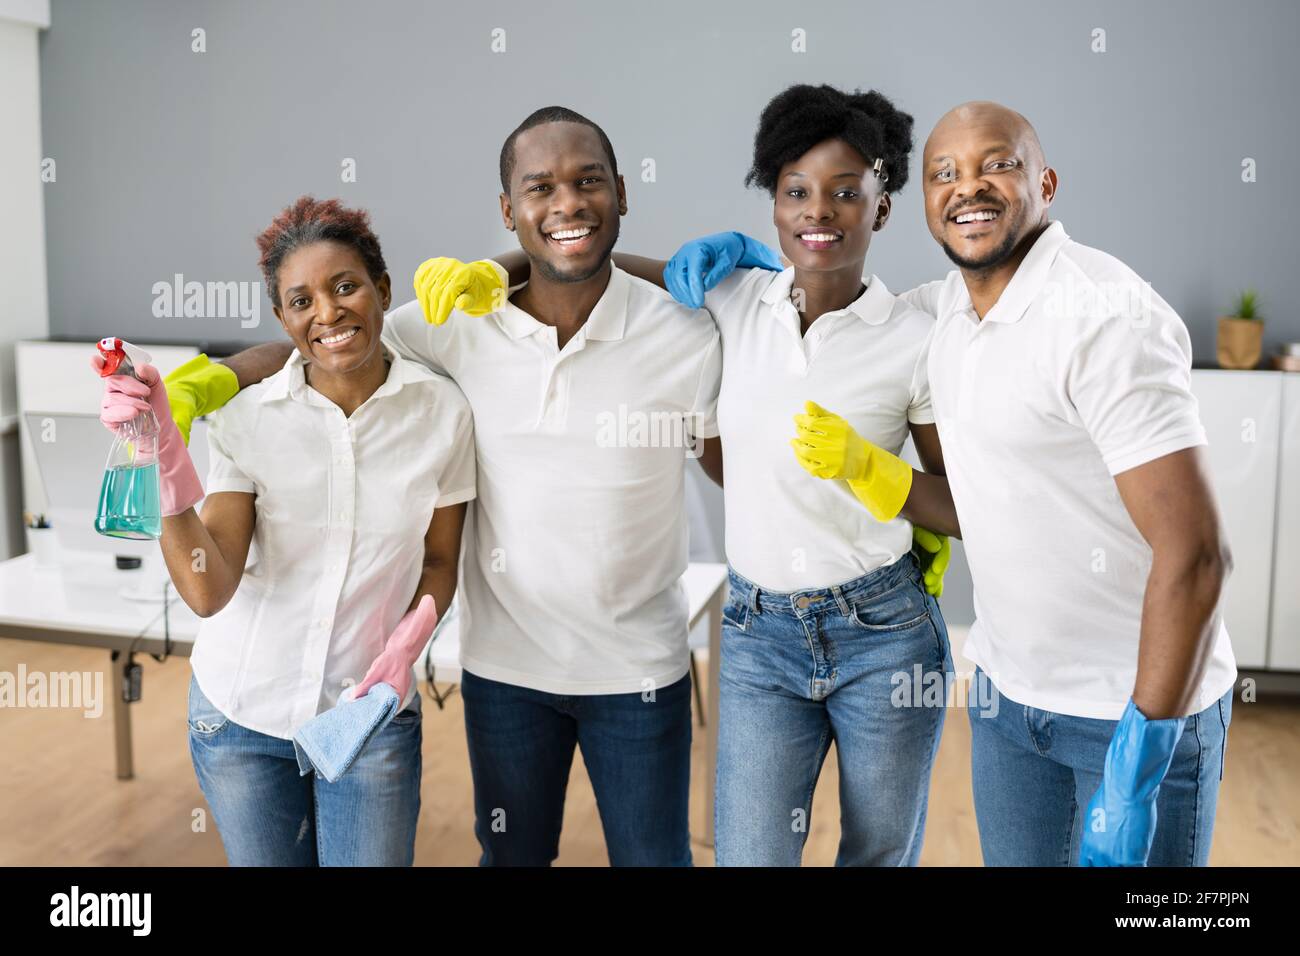 African Commercial Janitor Cleaning Staff. Cleaner Service Stock Photo